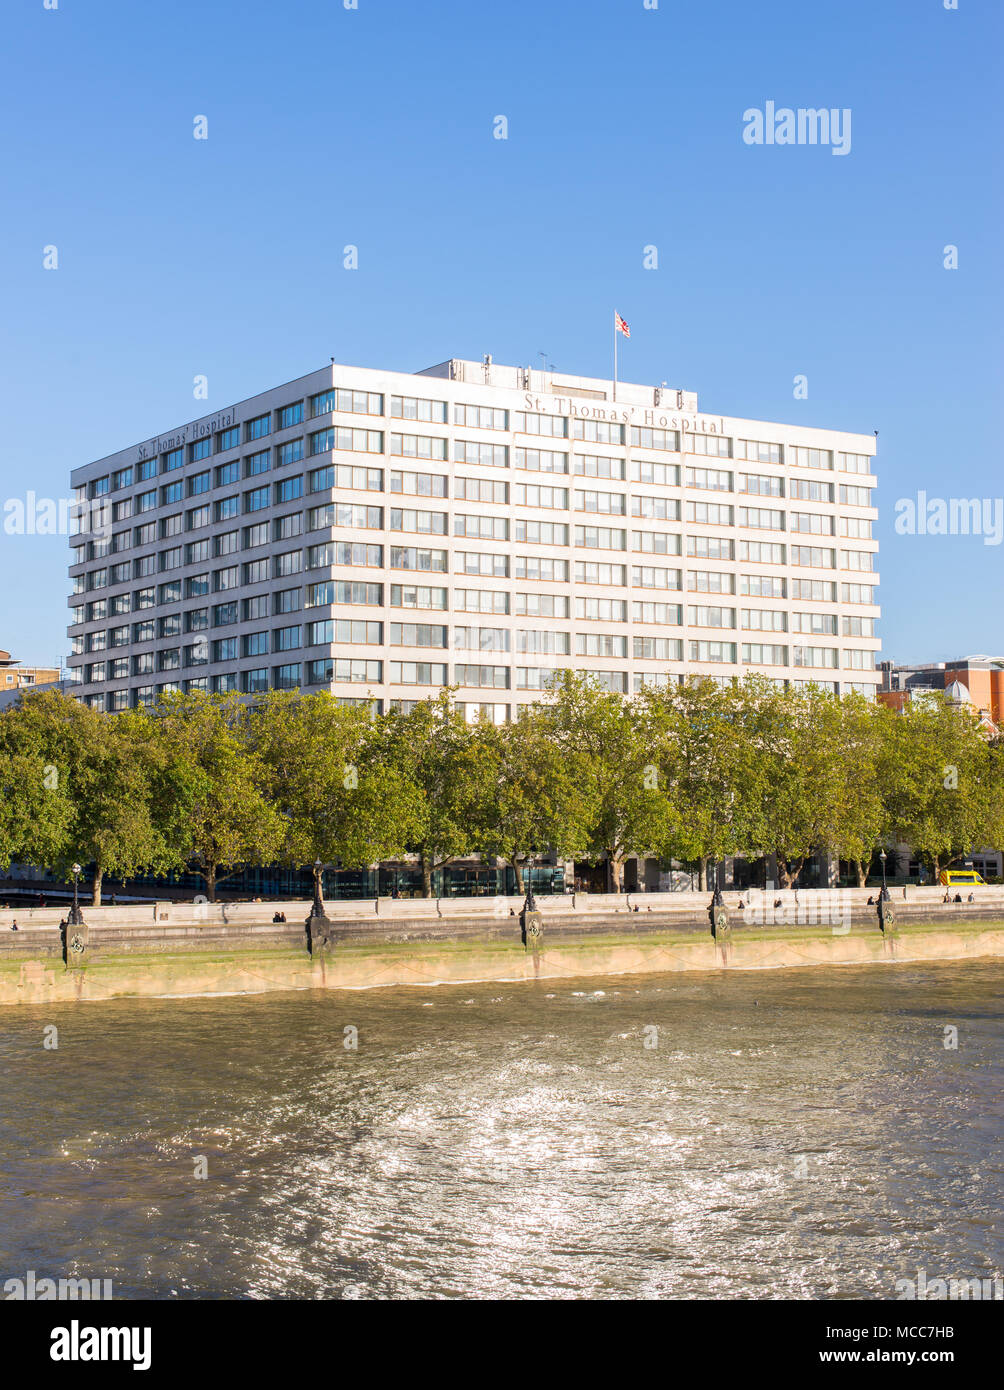 St Thomas' Hospital on the banks of river Thames is a large NHS teaching hospital in Central London, England. Stock Photo